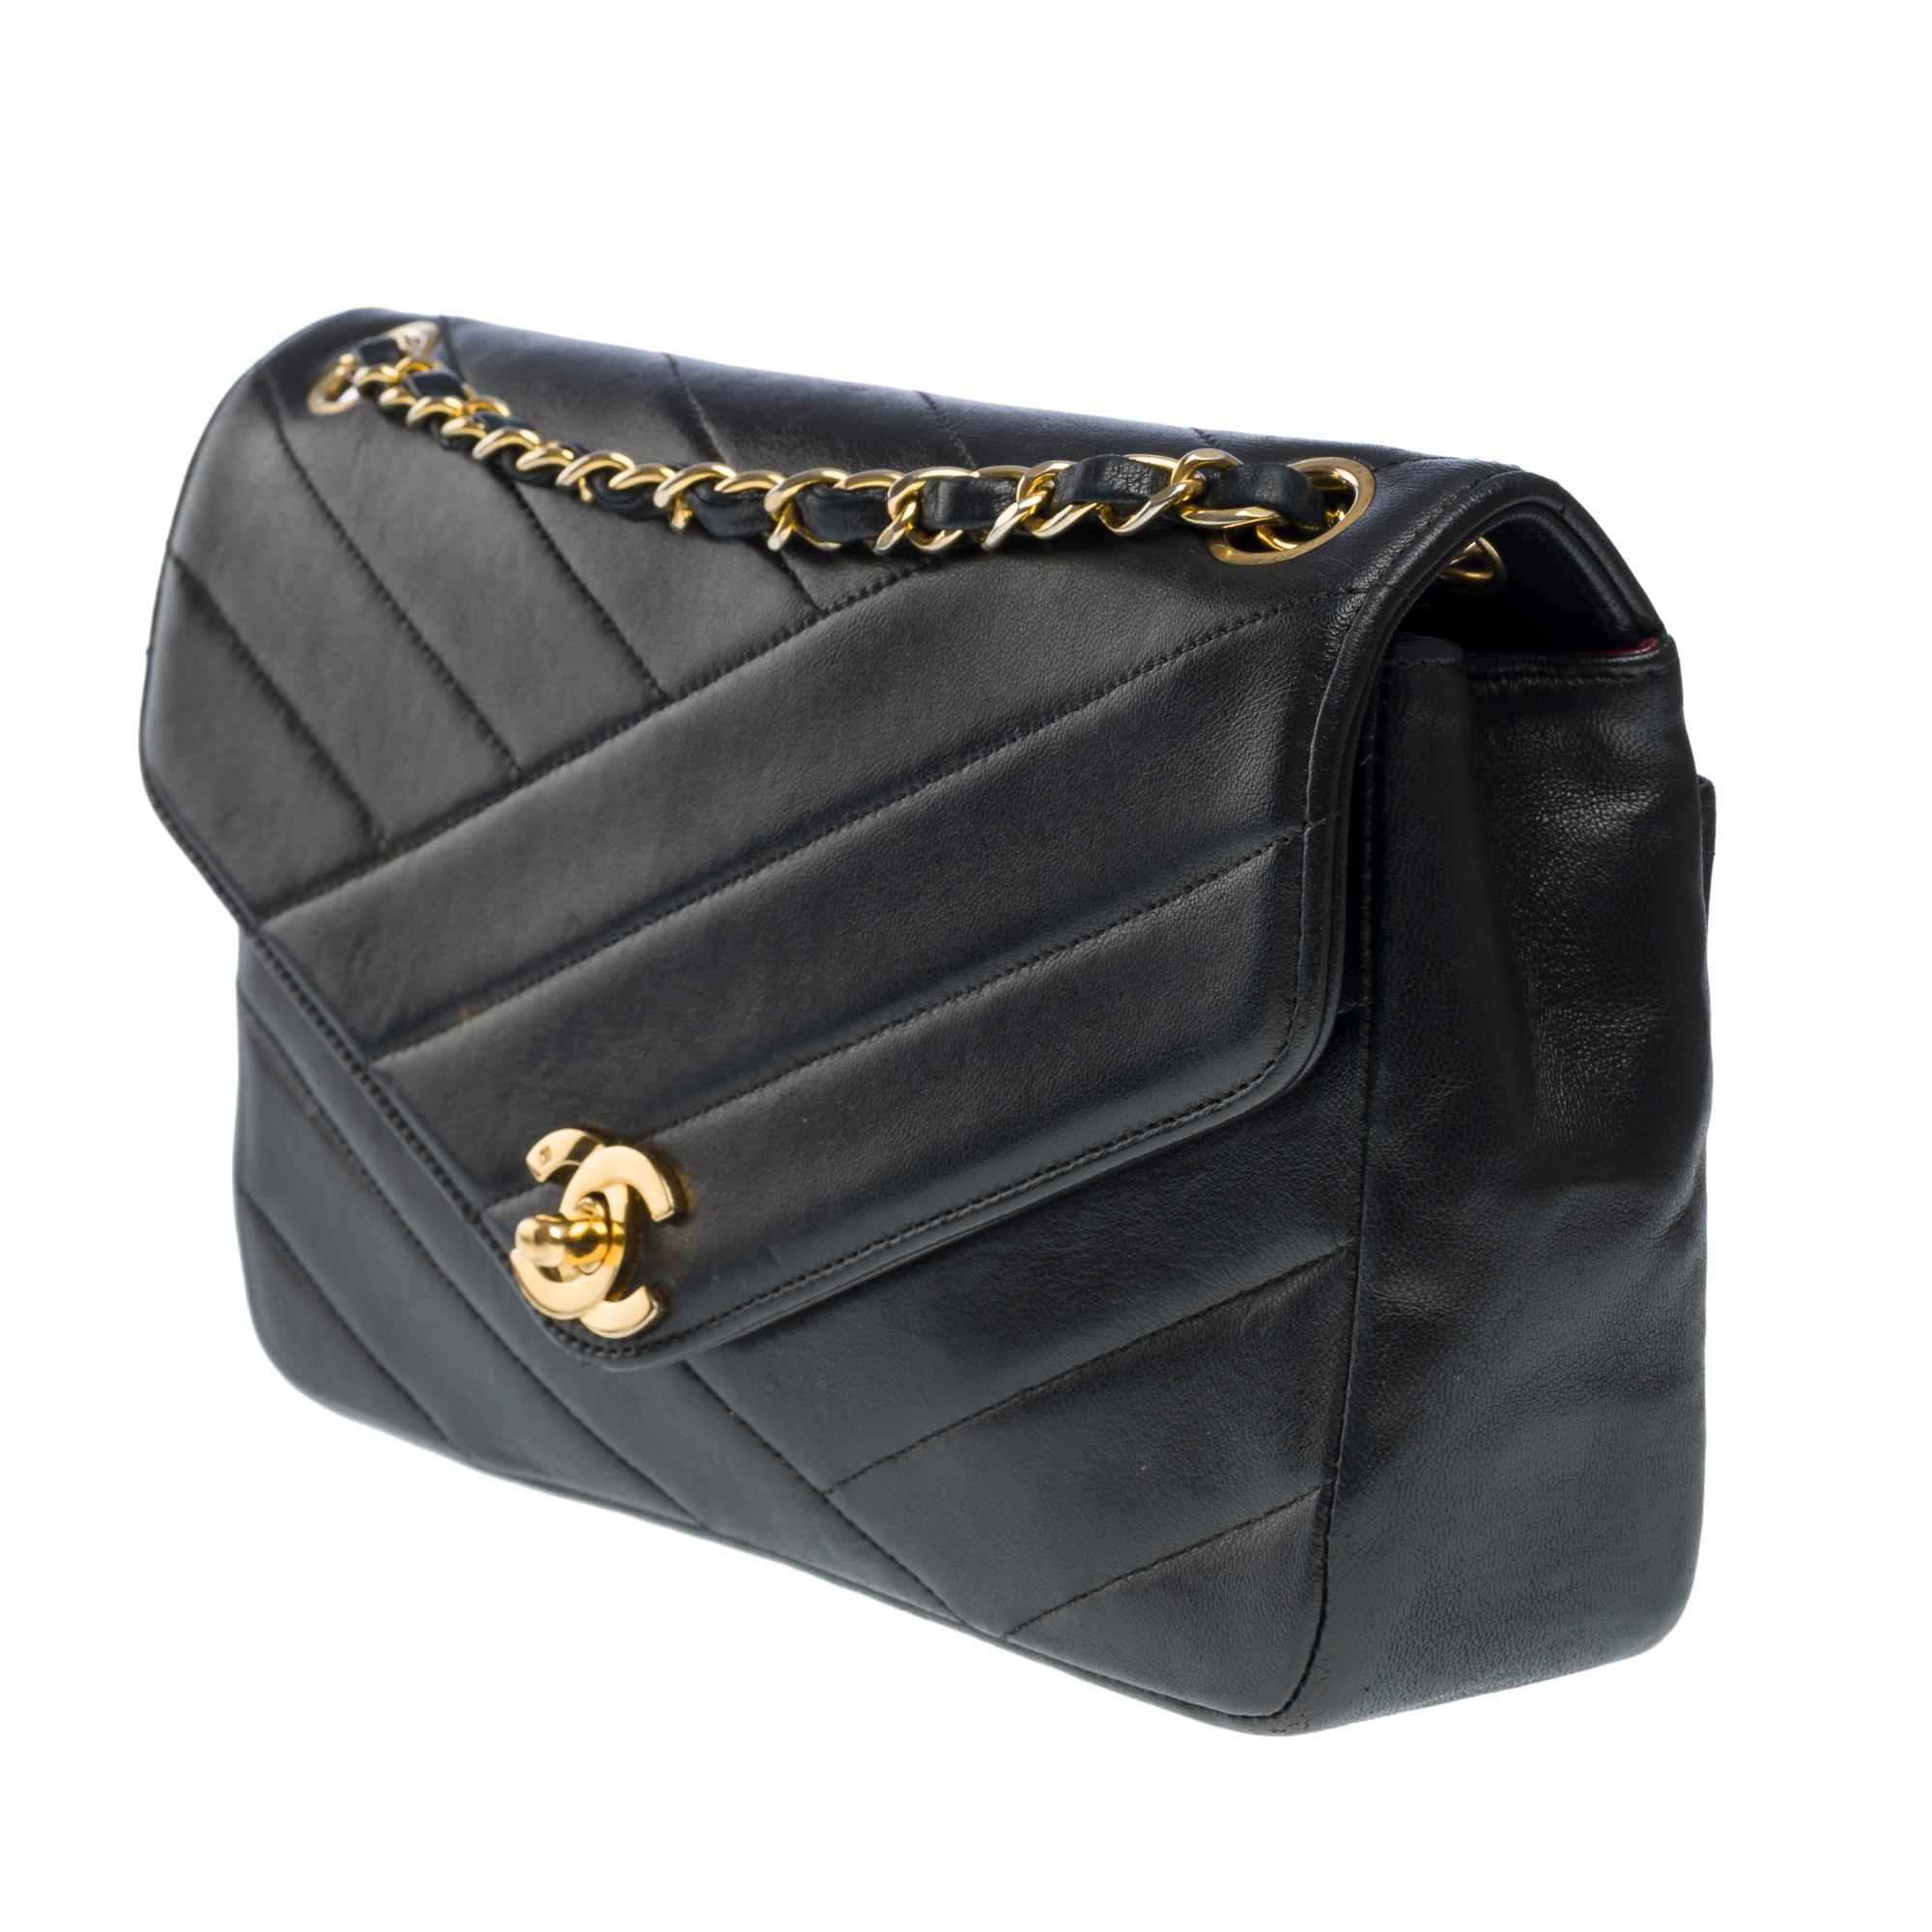 Chanel Classic shoulder flap bag in black herringbone quilted lamb leather, GHW 1